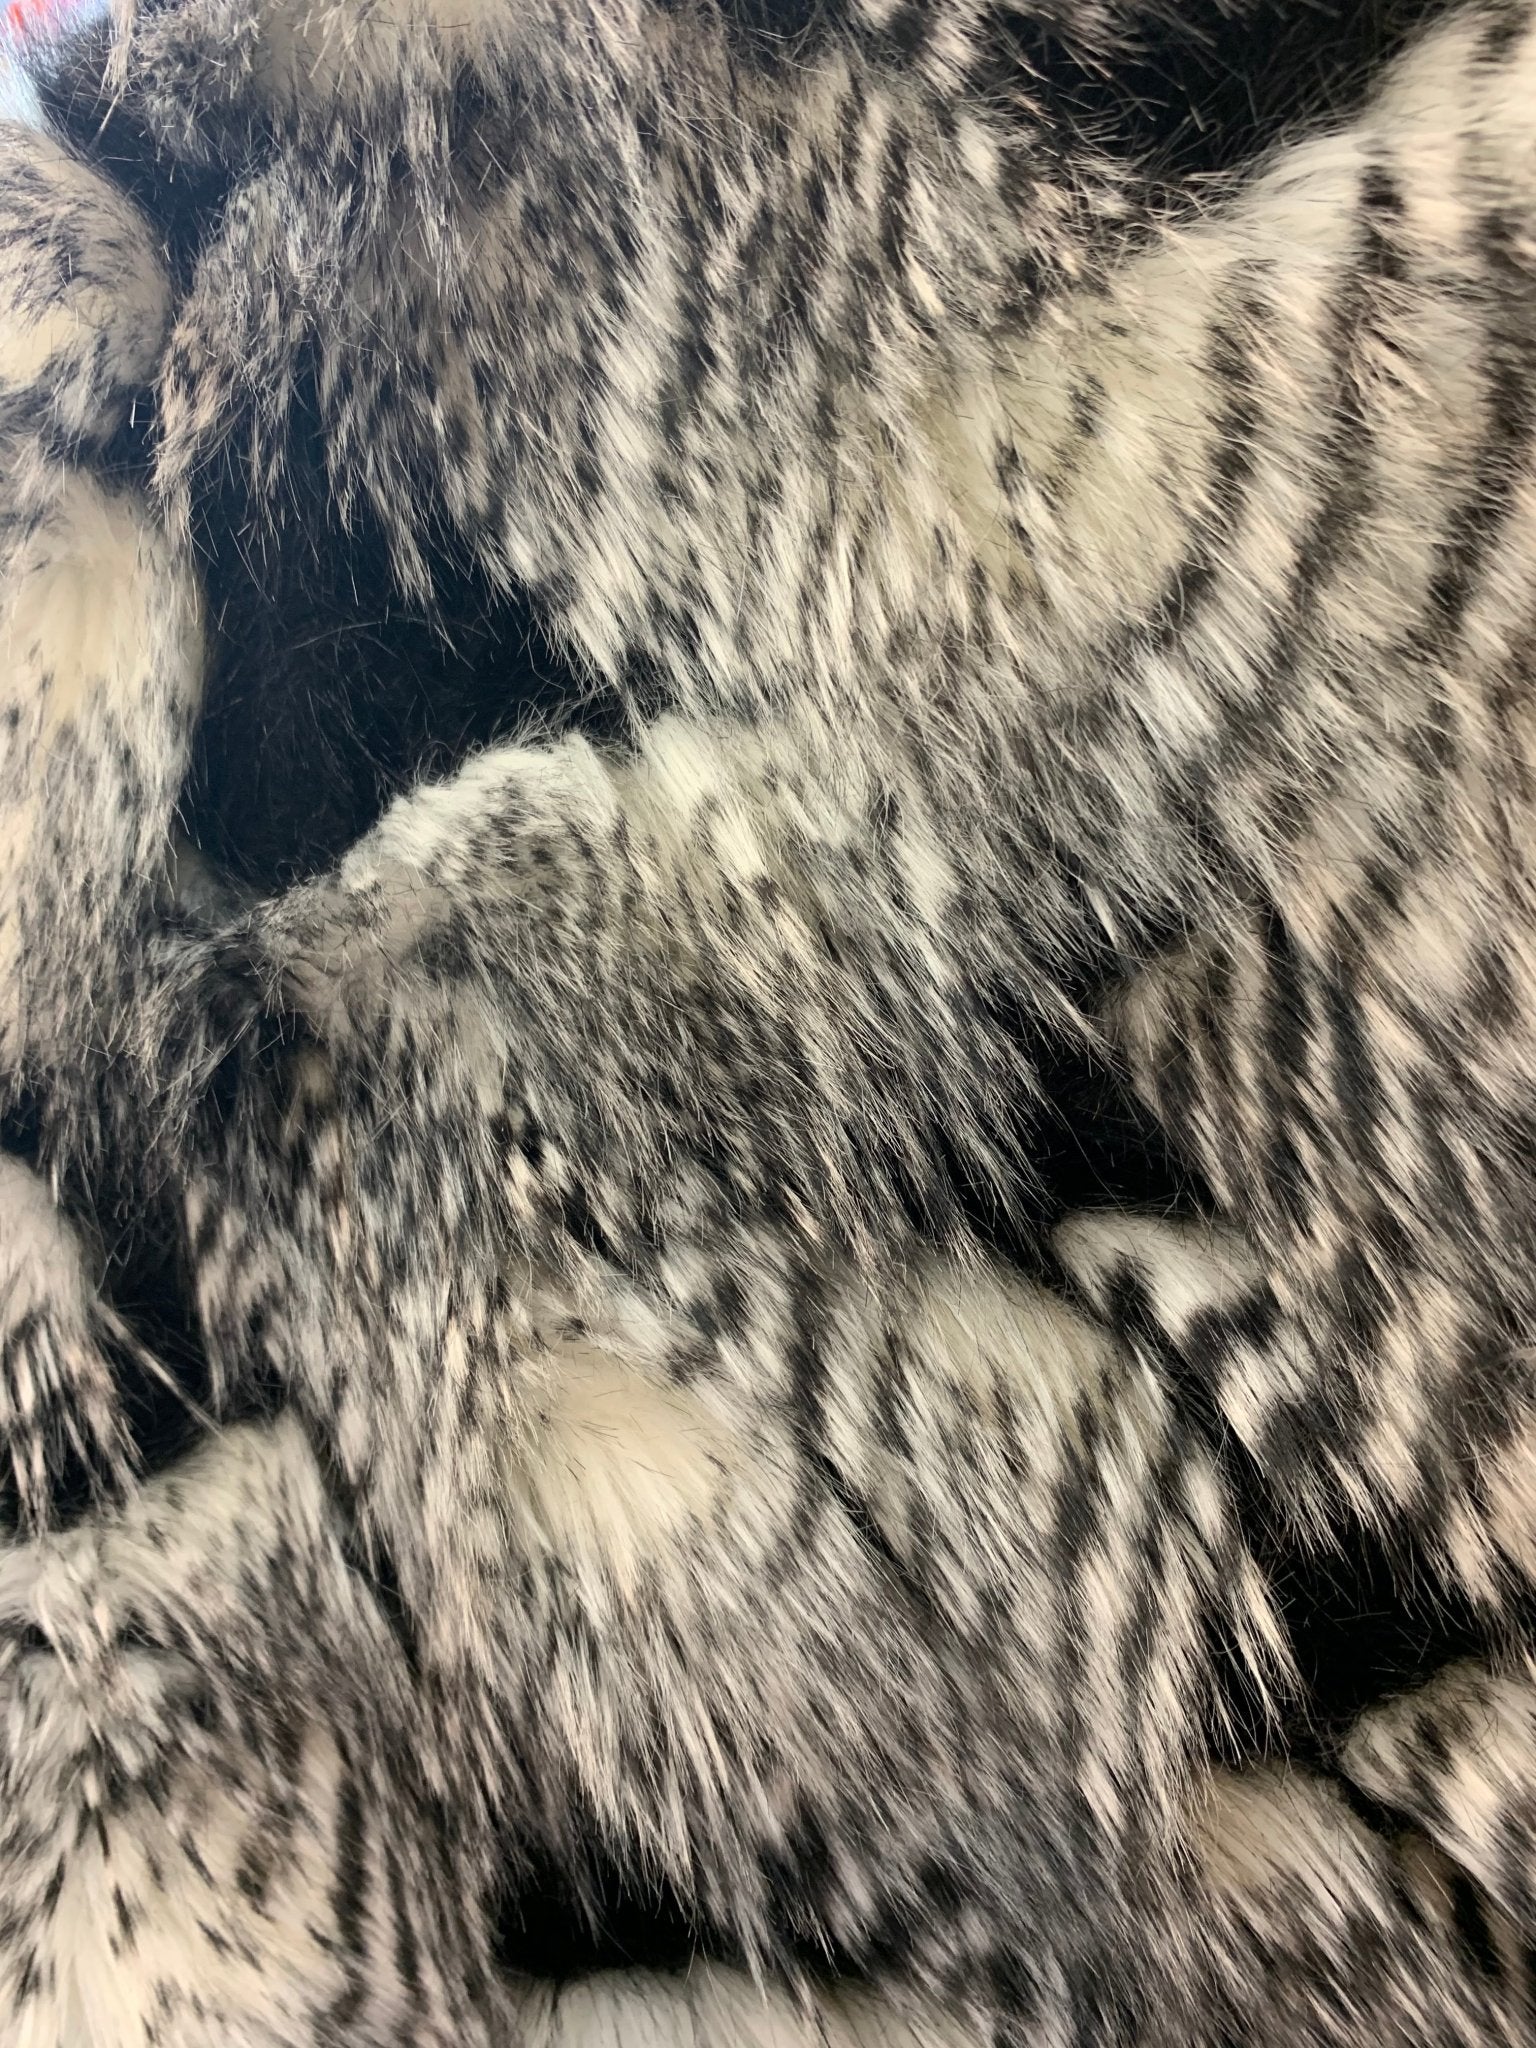 Faux Fake Fur Feathered Bird Long Pile Fabric | Faux Fur MaterialICEFABRICICE FABRICSGrayBy The Yard (60 inches Wide)Faux Fake Fur Feathered Bird Long Pile Fabric | Faux Fur Material ICEFABRIC Gray